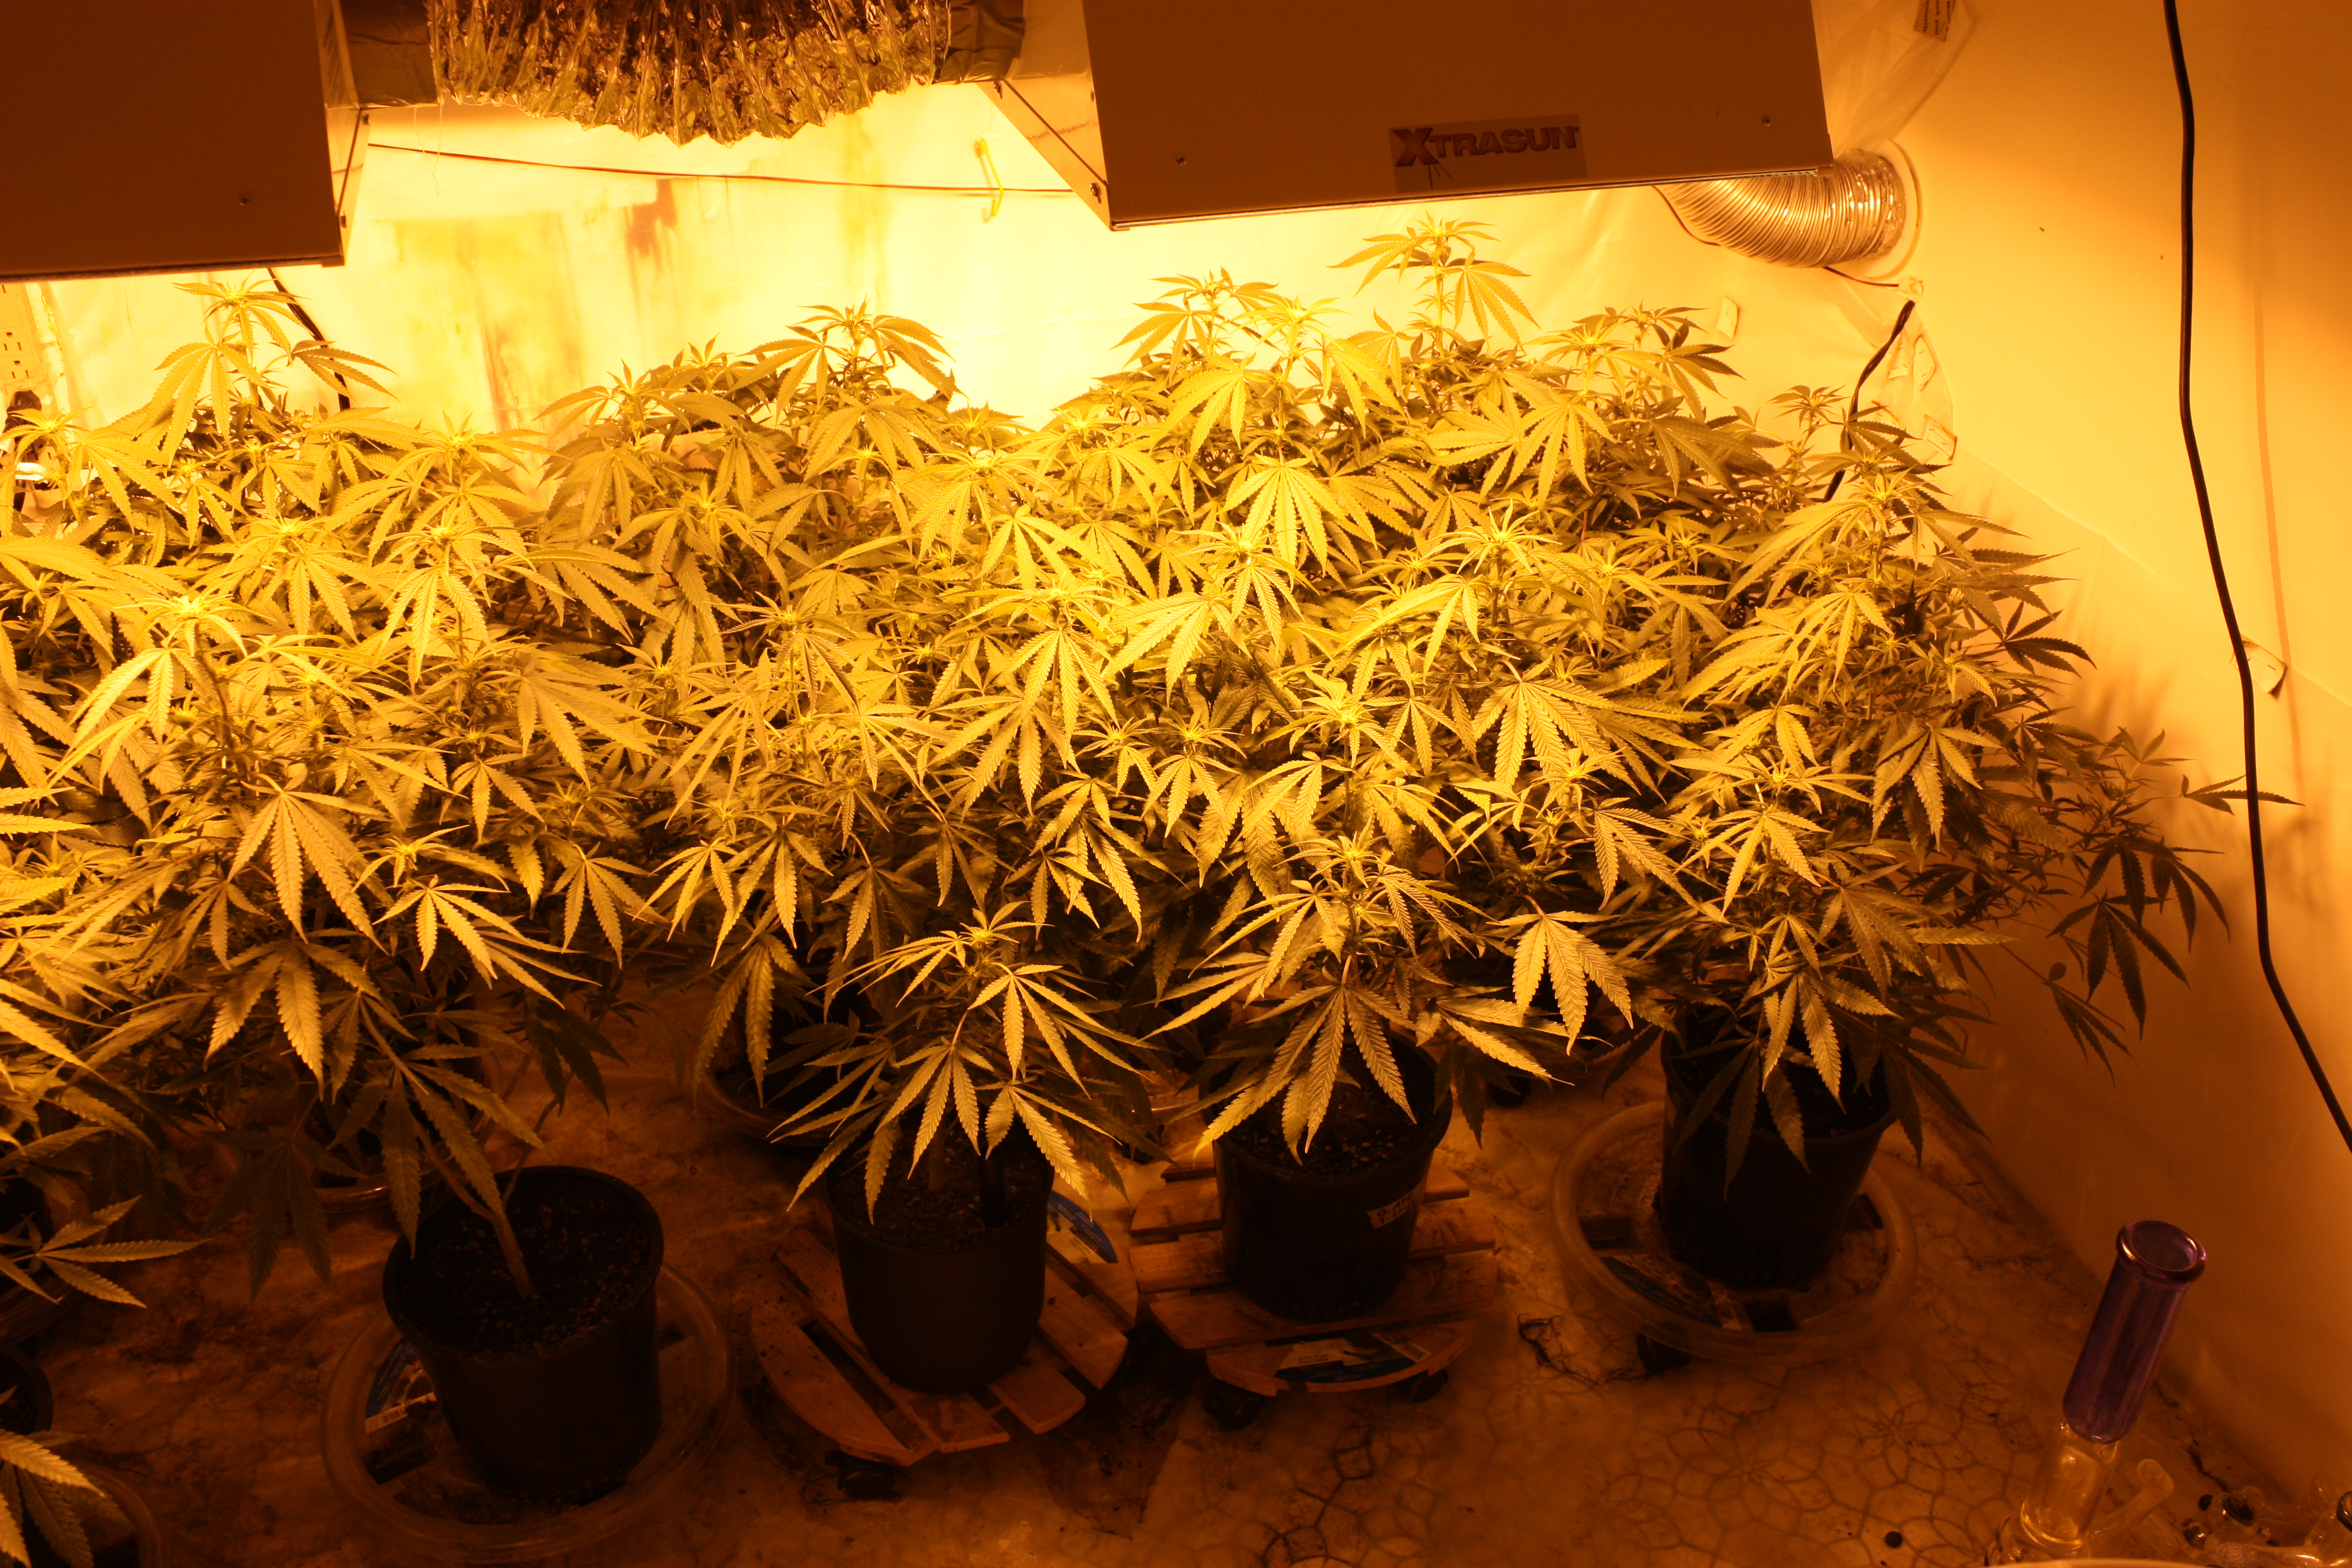 Chosing the right Master Grower to set up commercial grow rooms is critical.